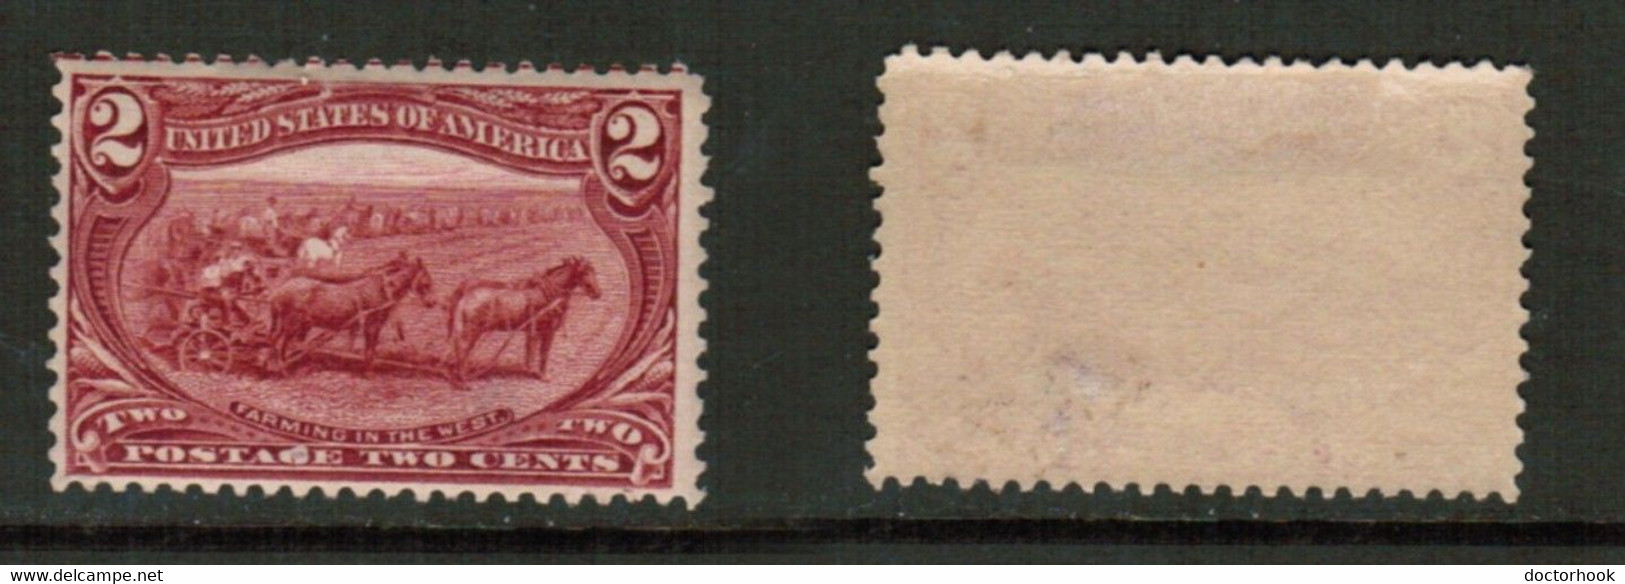 U.S.A.   Scott # 286* MINT HINGED (CONDITION AS PER SCAN) (Stamp Scan # 834-10) - Unused Stamps